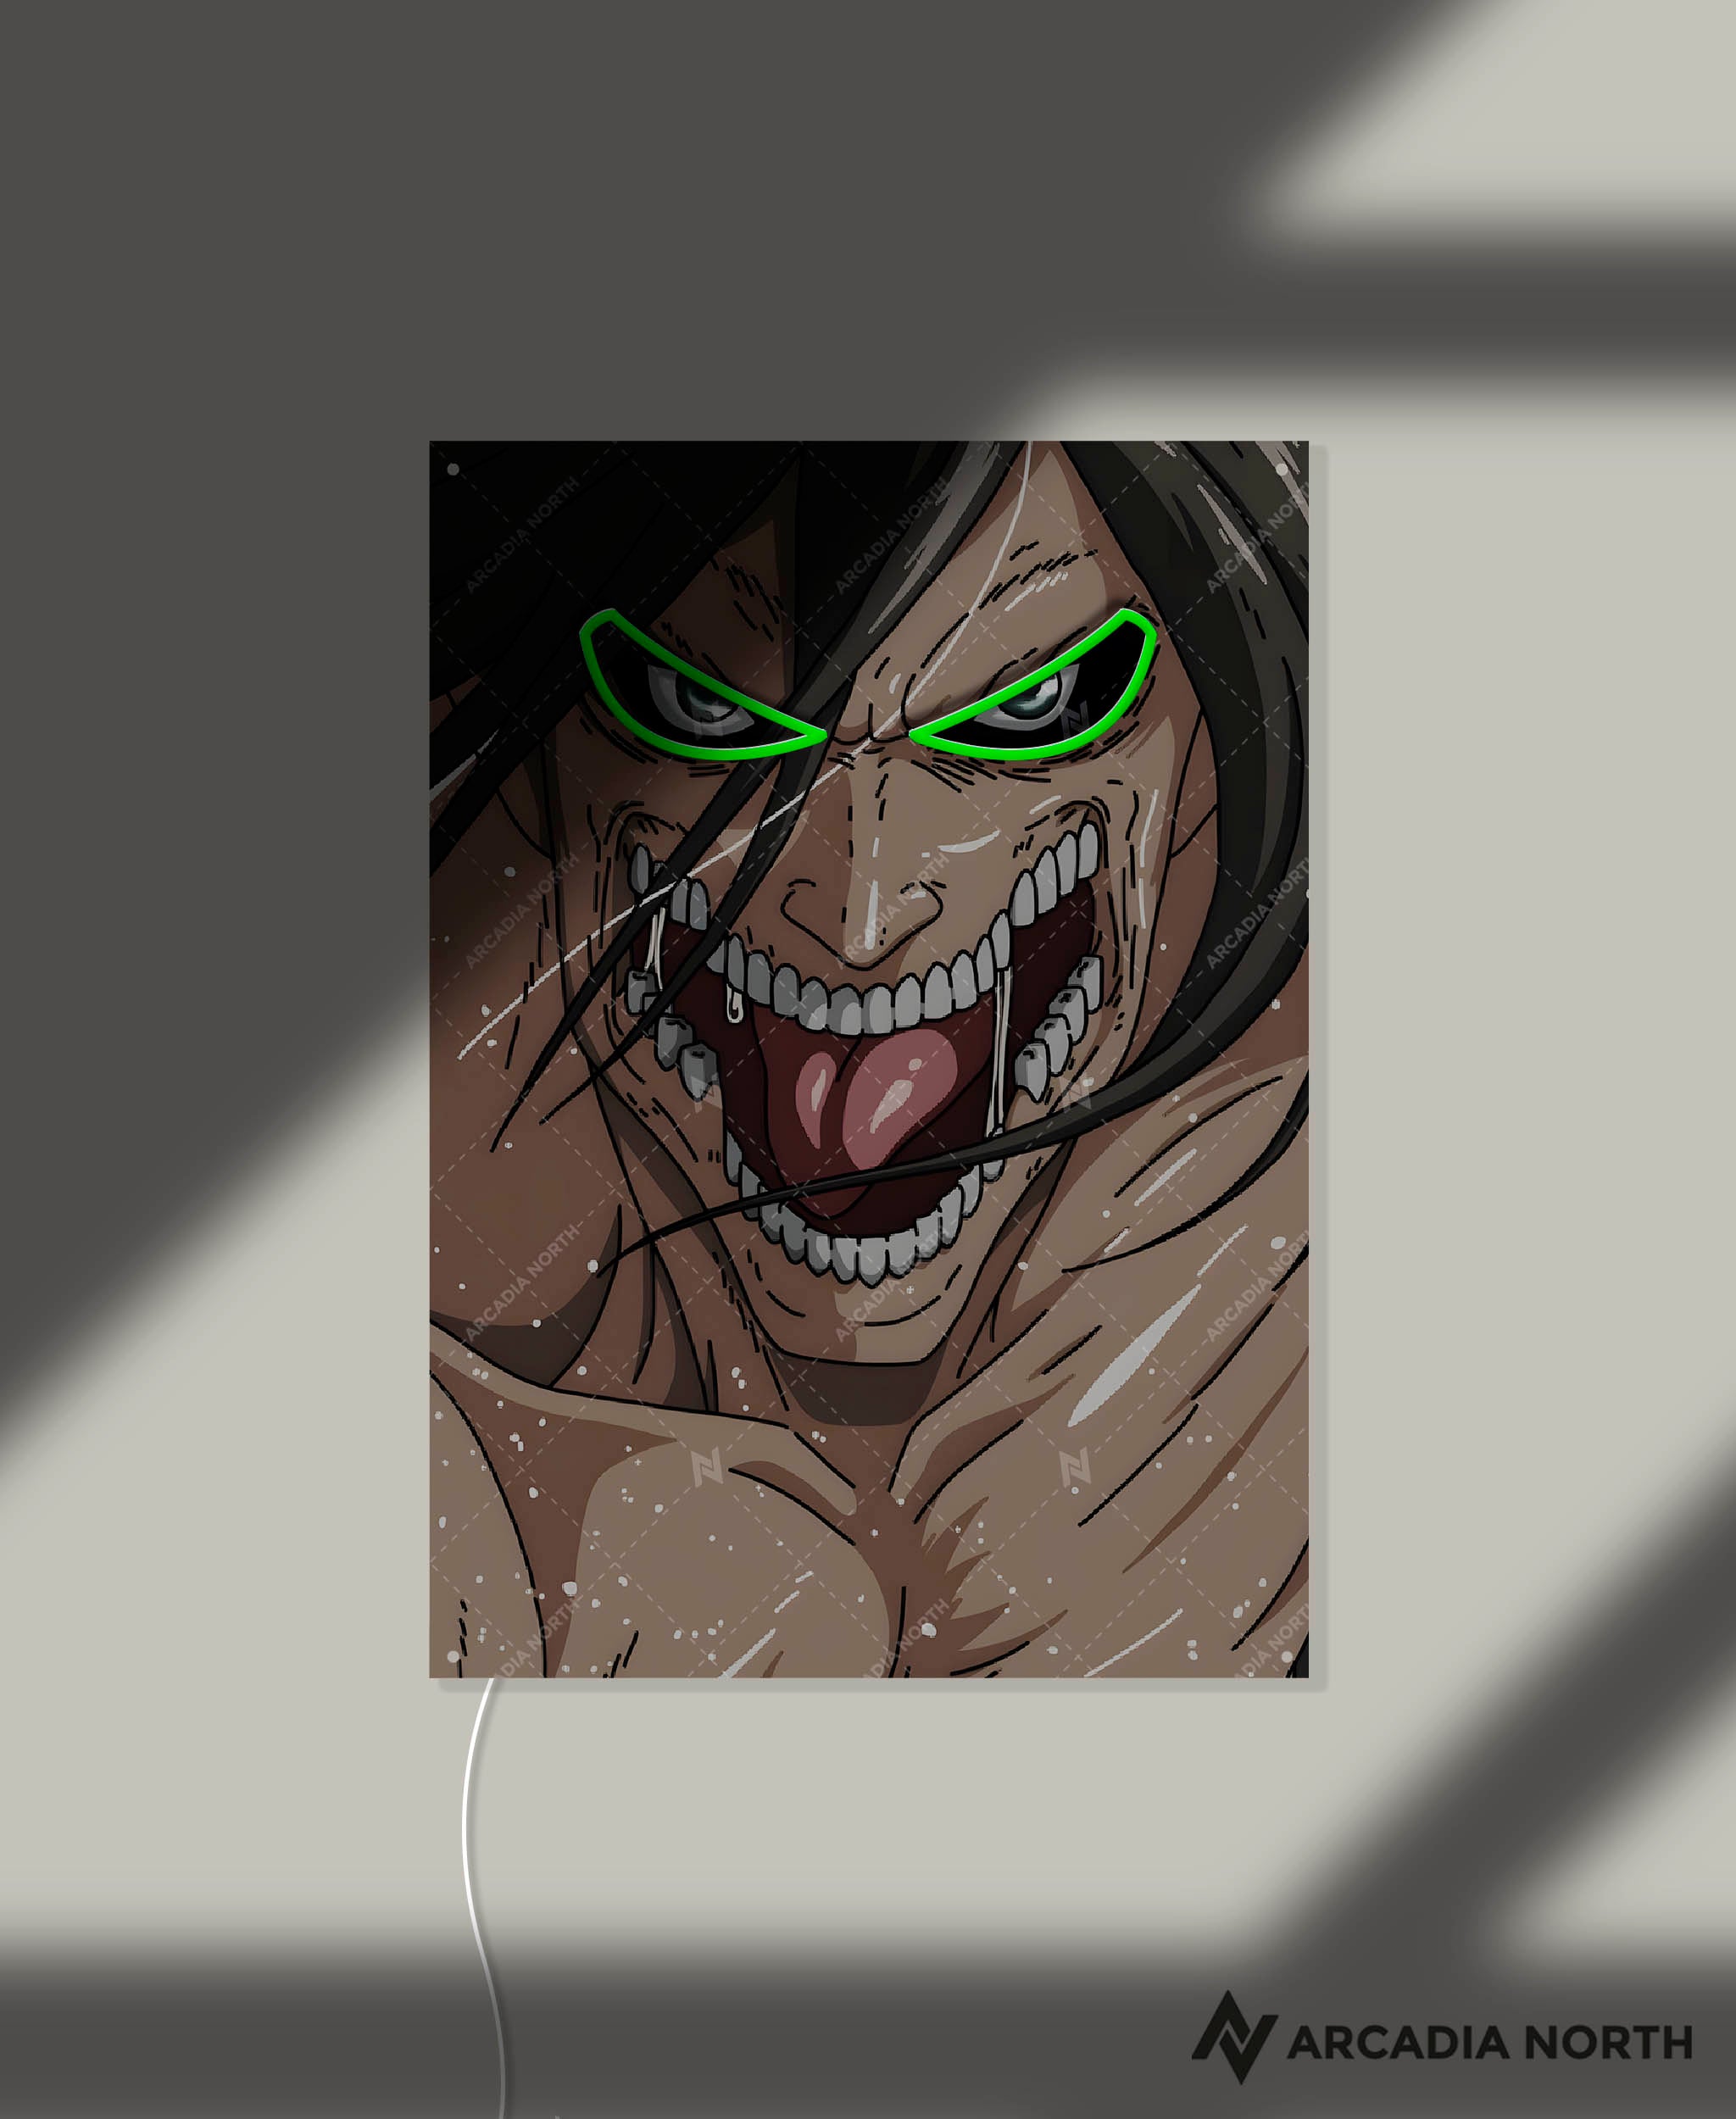 Arcadia North AURALIGHT - an LED Poster featuring the anime Attack on Titan with Eren as the Attack TItan with glowing green eyes. Illuminated by glowing neon LED lights. UV-printed on acrylic.